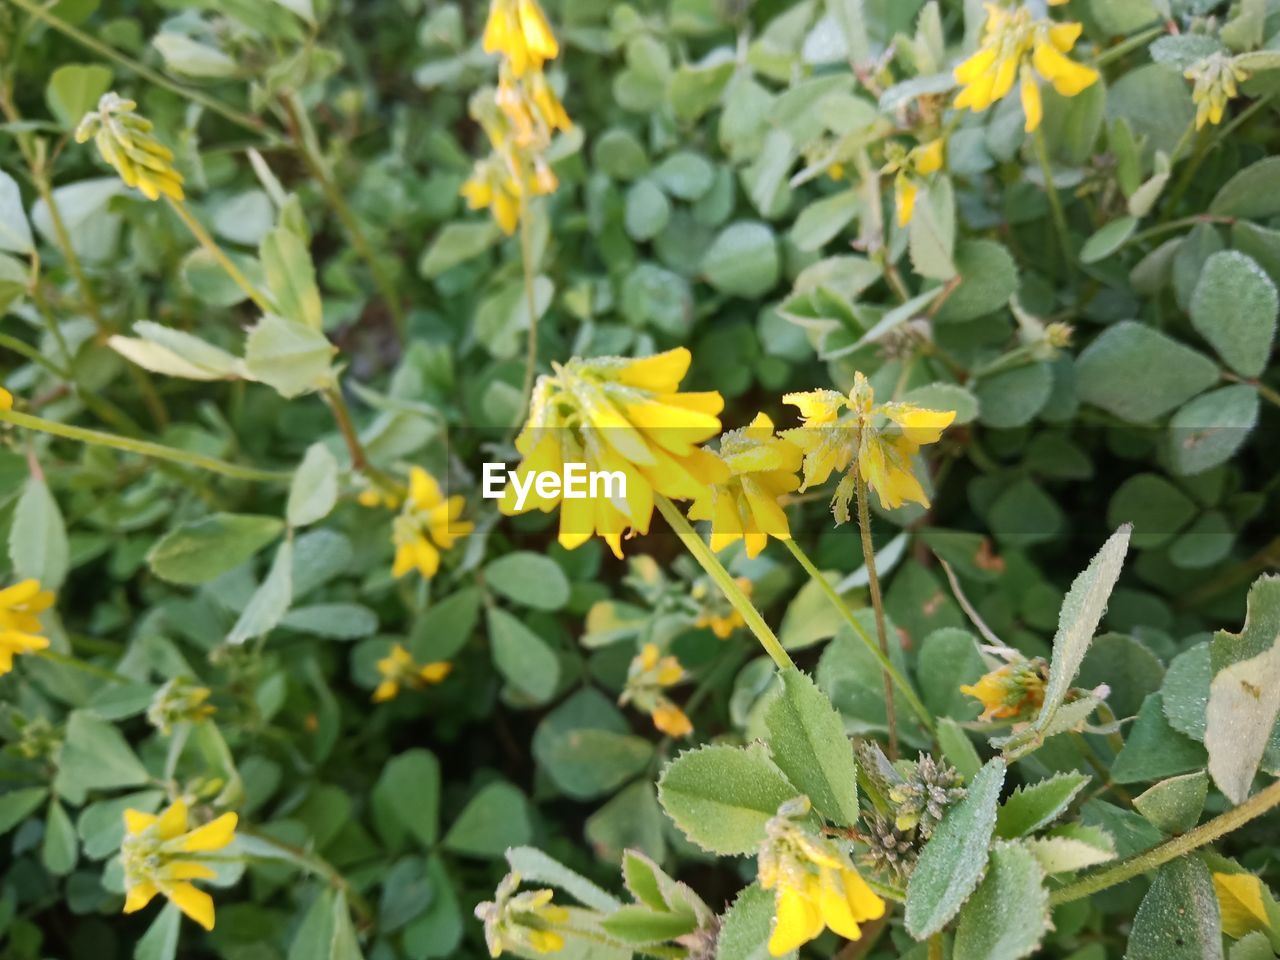 CLOSE-UP OF YELLOW FLOWERING PLANT AND LEAVES